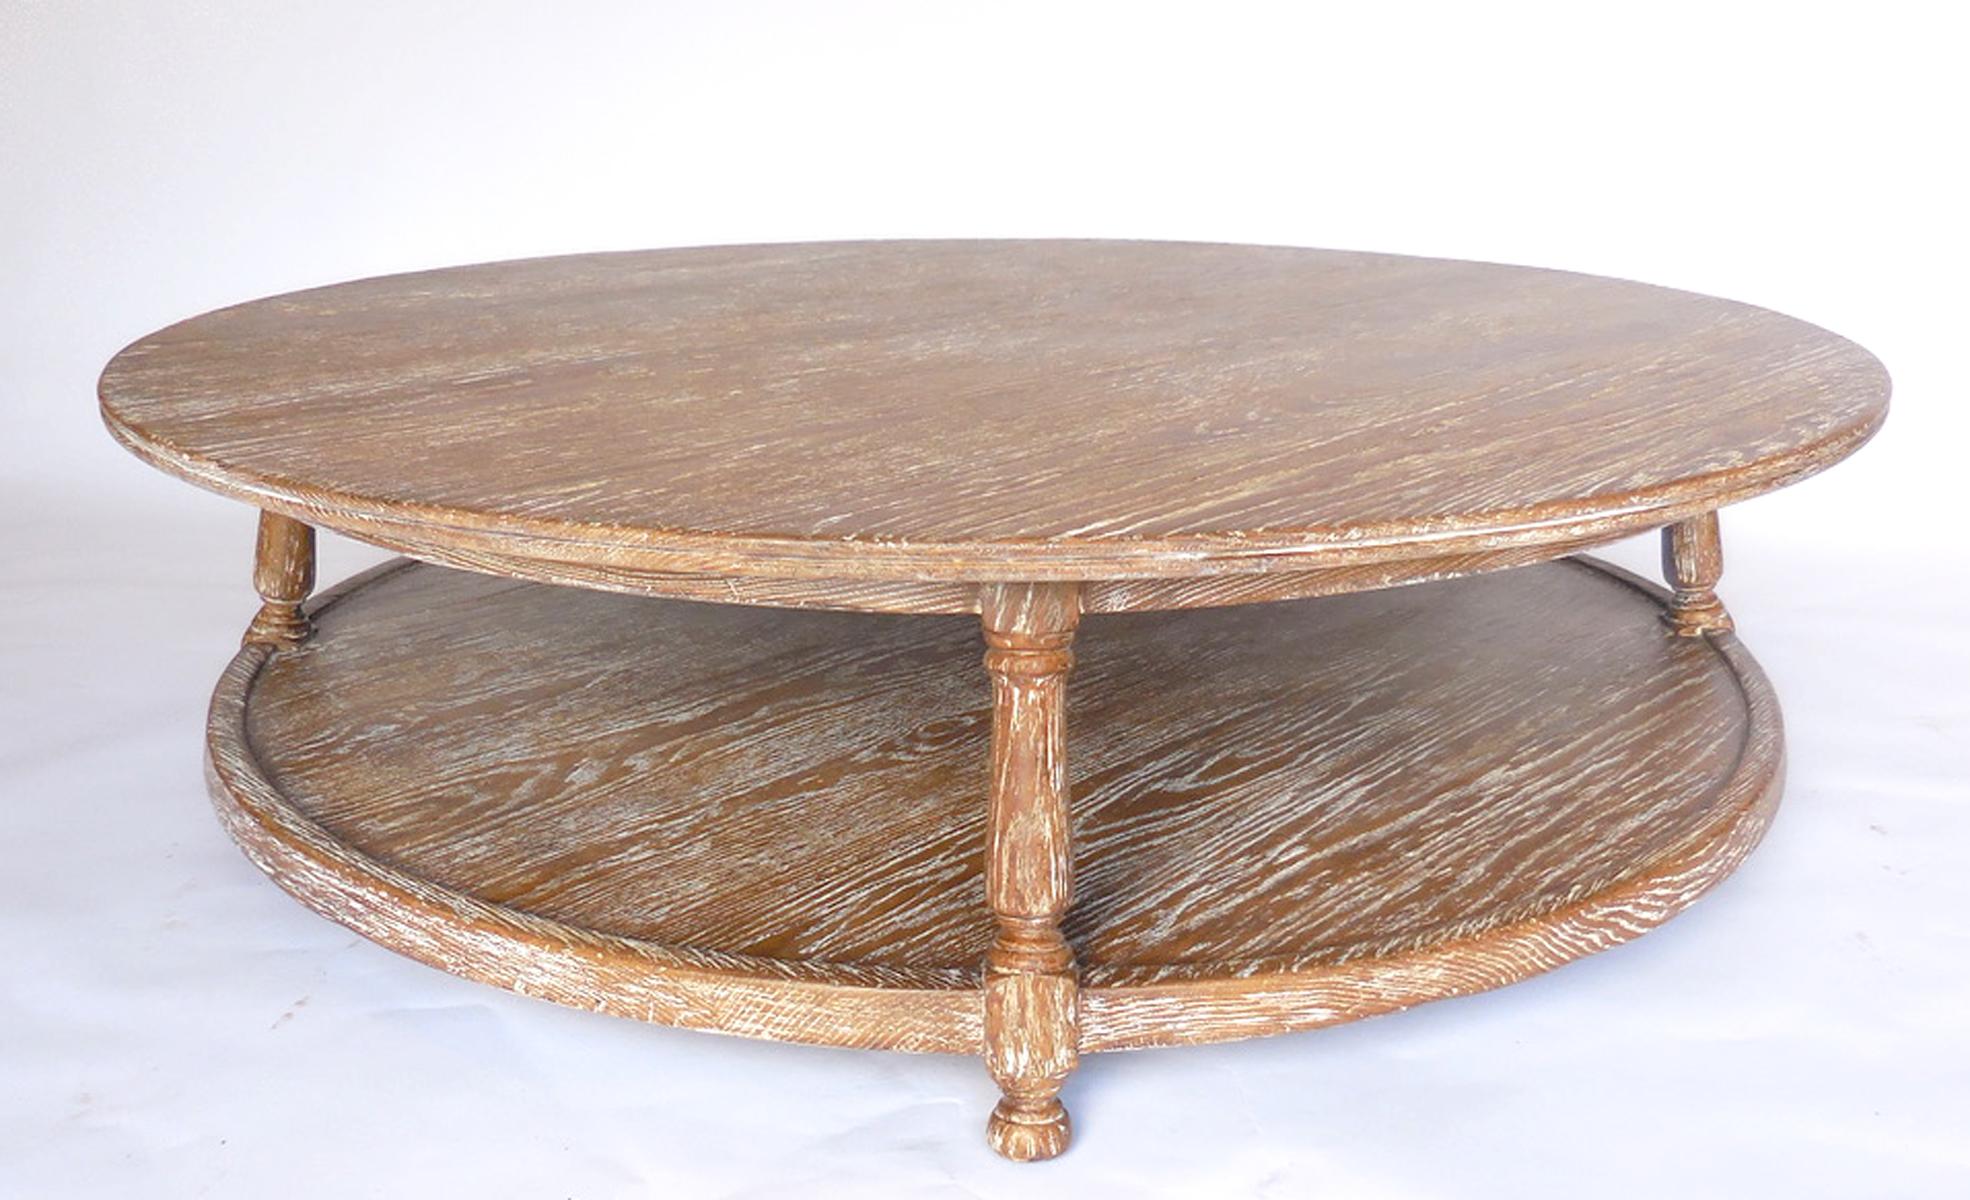 This custom coffee table with shelf can be made in oak, mahogany or walnut in a range of finishes. Bench made and hand finished in Los Angeles by Dos Gallos Studio.
As shown in 54 inches diameter and 14.5 inches tall, in a rustic ceruse oak finish